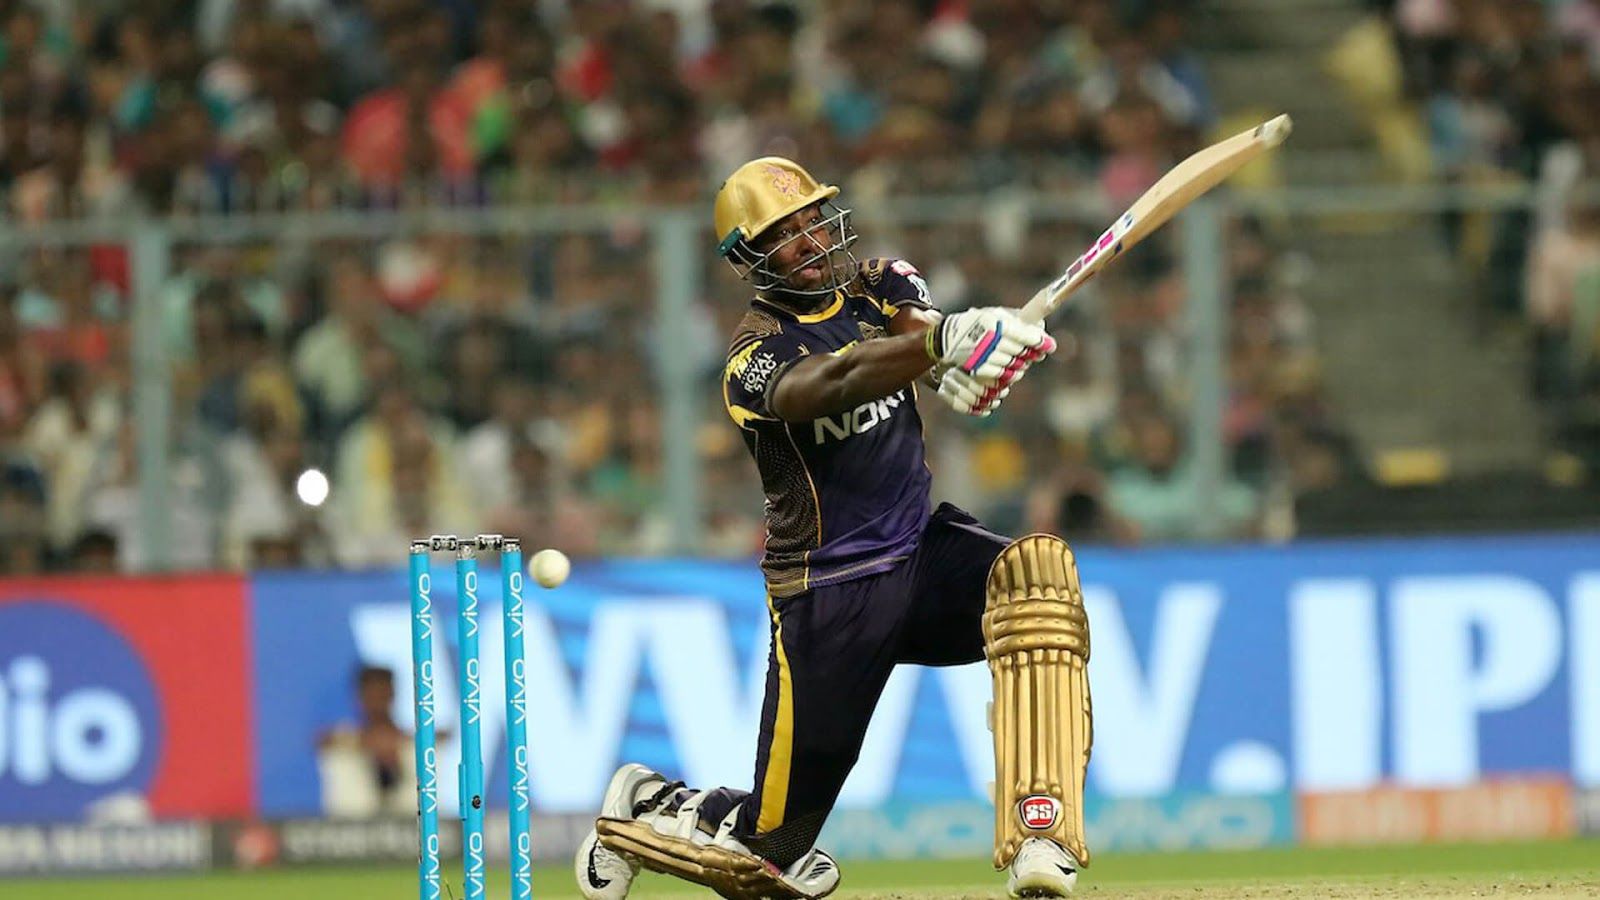 Kolkata Knight Riders  GalaxyOfKnights Power Cards  Muscle Power   Enter Code 𝙳𝚁𝙴𝚁𝚄𝚂𝚂 AndreRussell KKR AmiKKR WeTheFuture  IPLRetention  Facebook